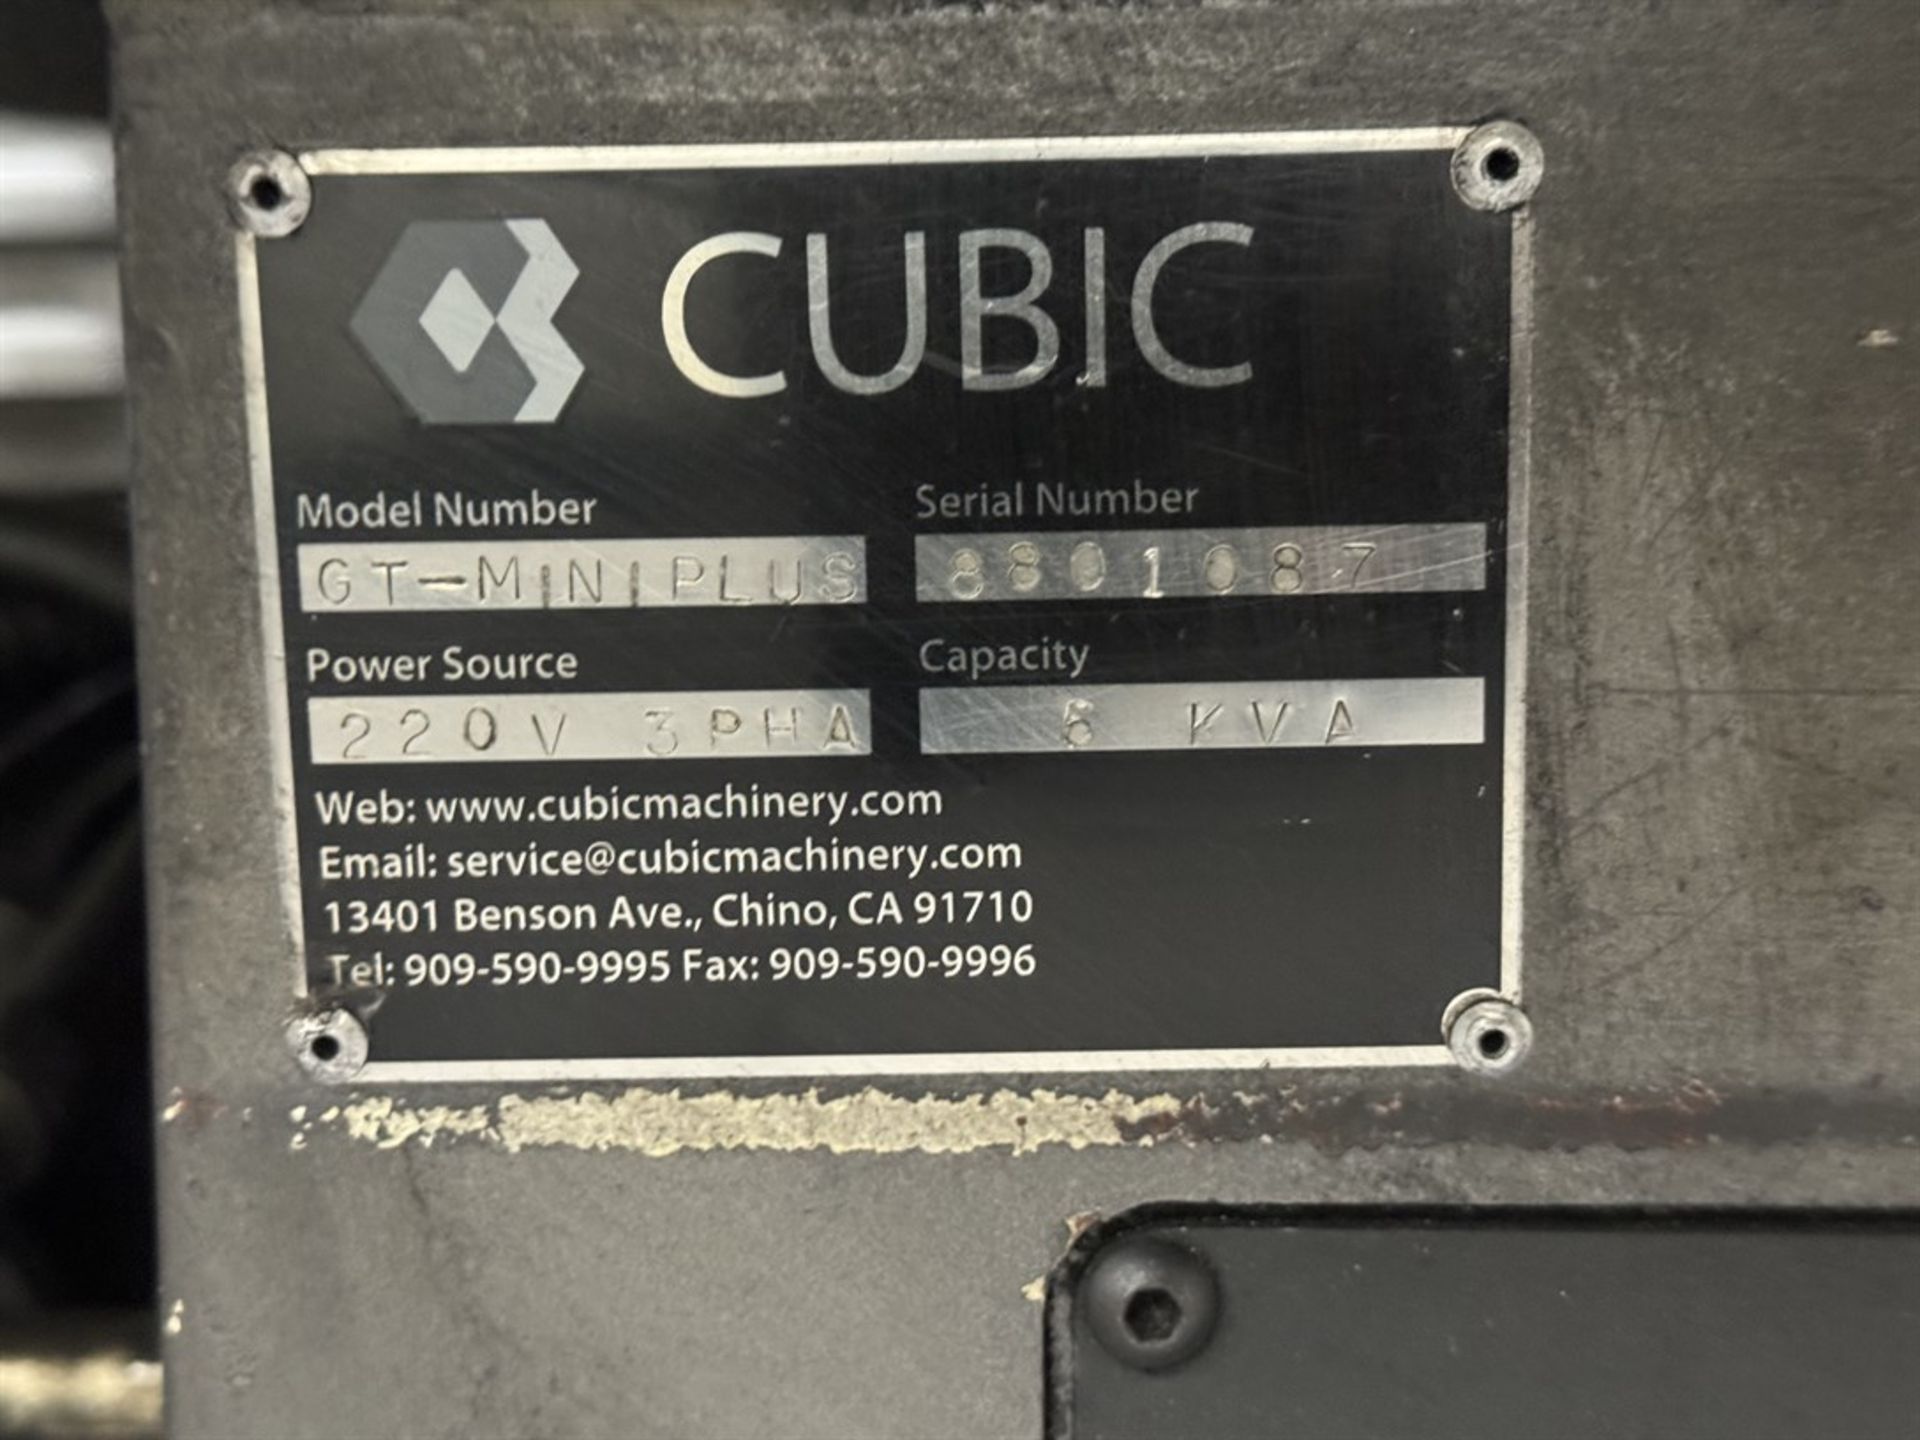 CUBIC GT-MINI Plus CNC Gang Tool Lathe, s/n 8801087, Fanuc Series Oi Mate-TD Control, 60mm Turning D - Image 9 of 9